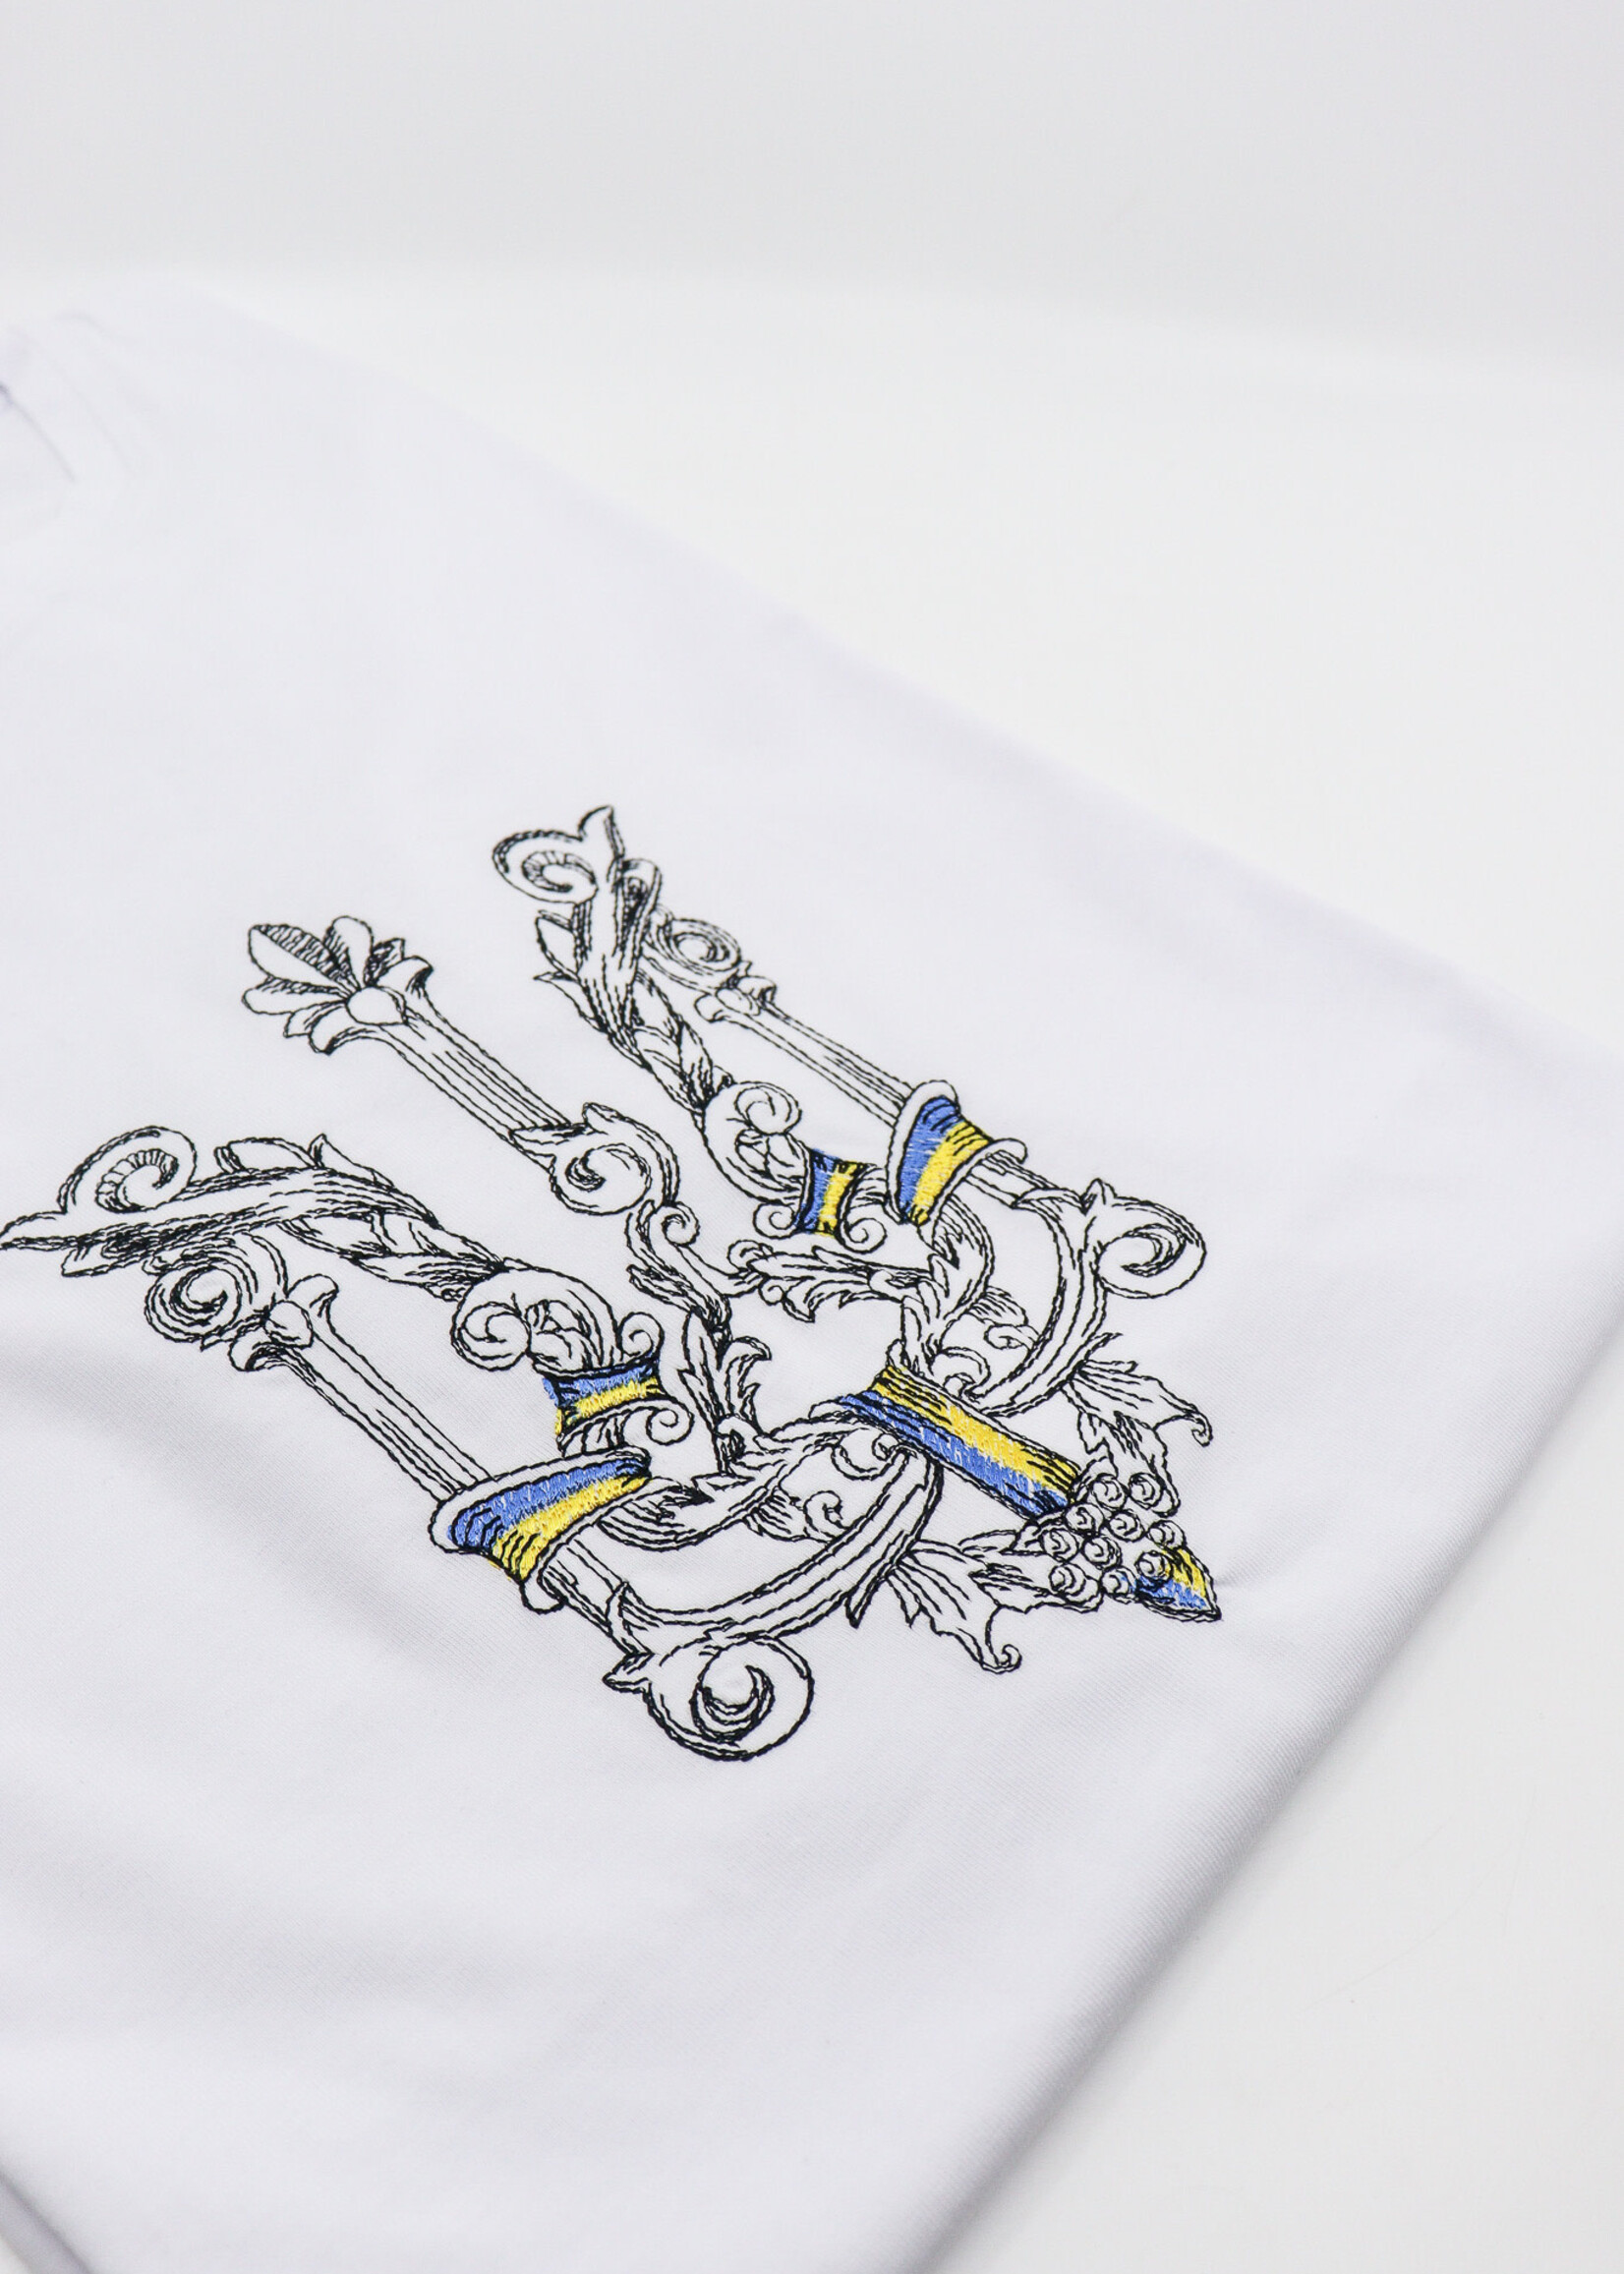 APPAREL - (M), T-Shirt "Tryzub",  Embroidered in Blue/ Yellow